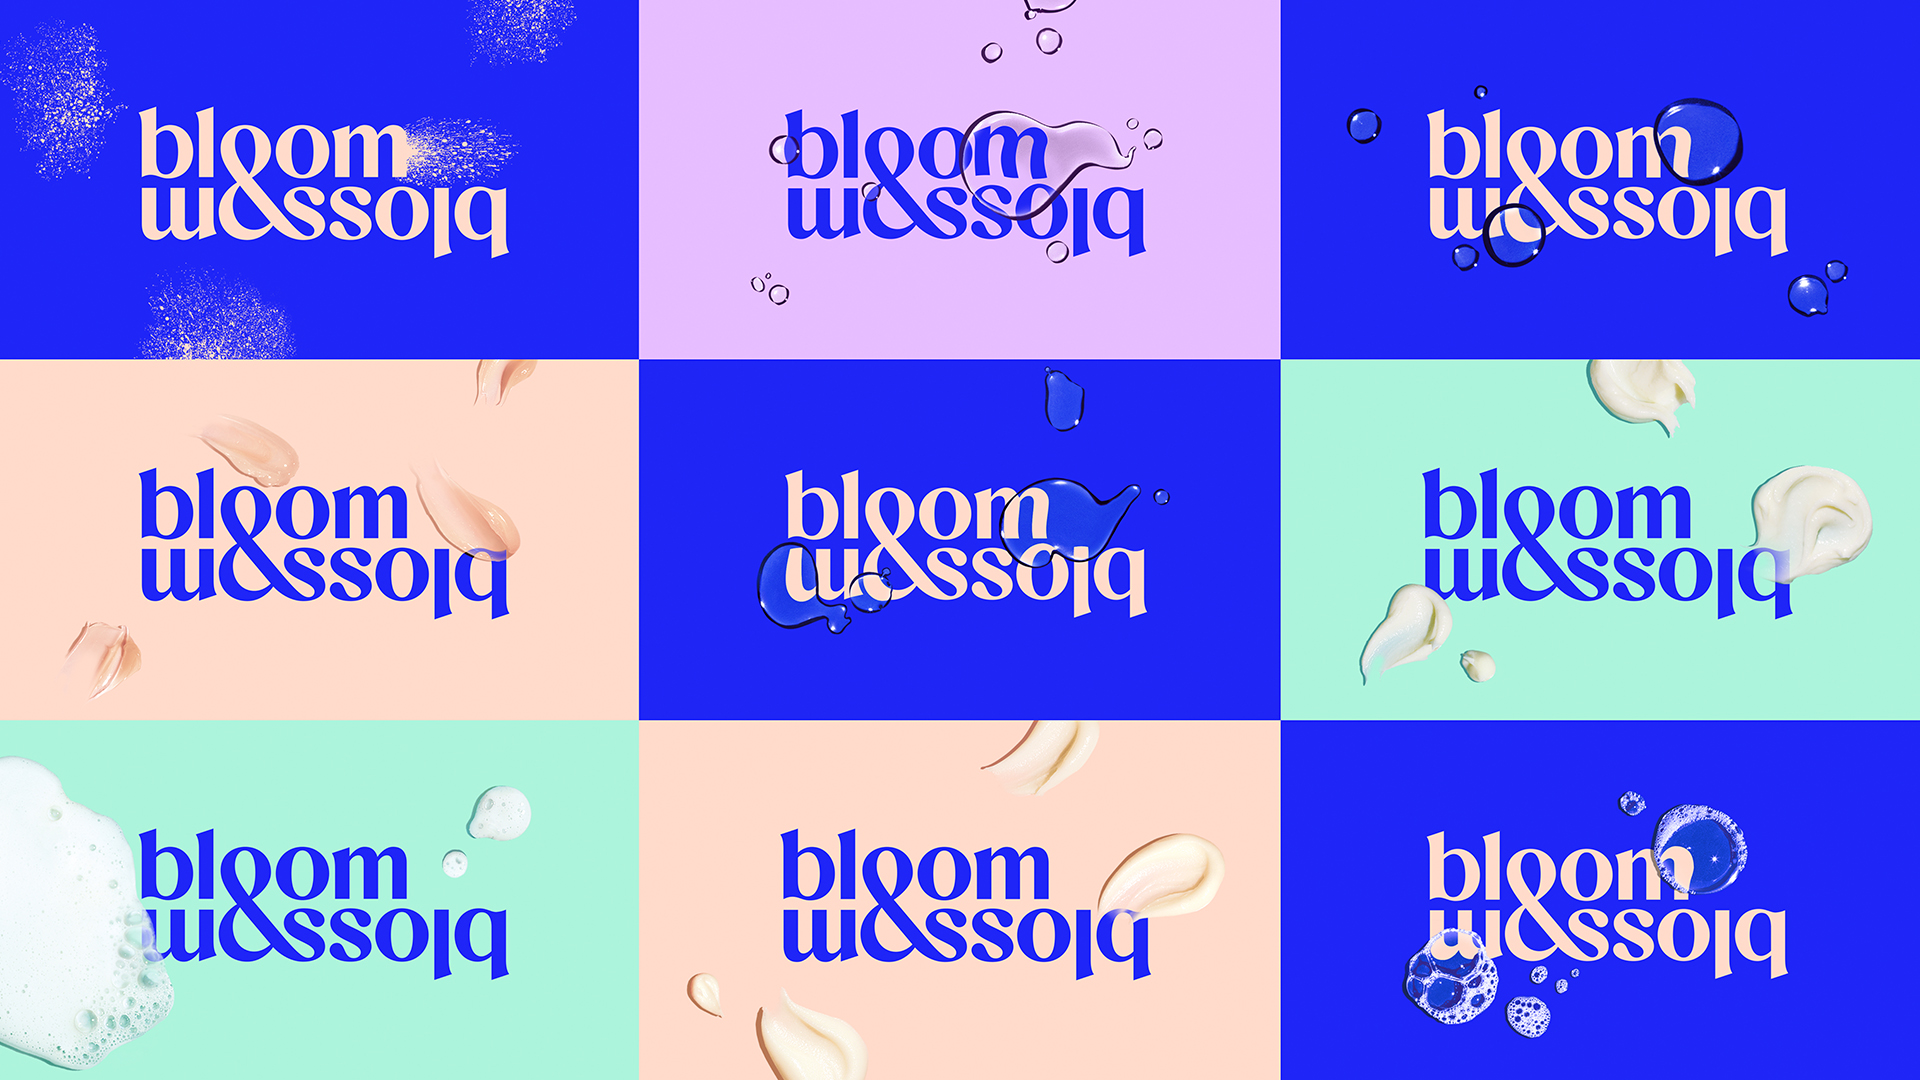 01. Bloom and Blossom redesign by Jones Knowles Ritchie - logo.jpg